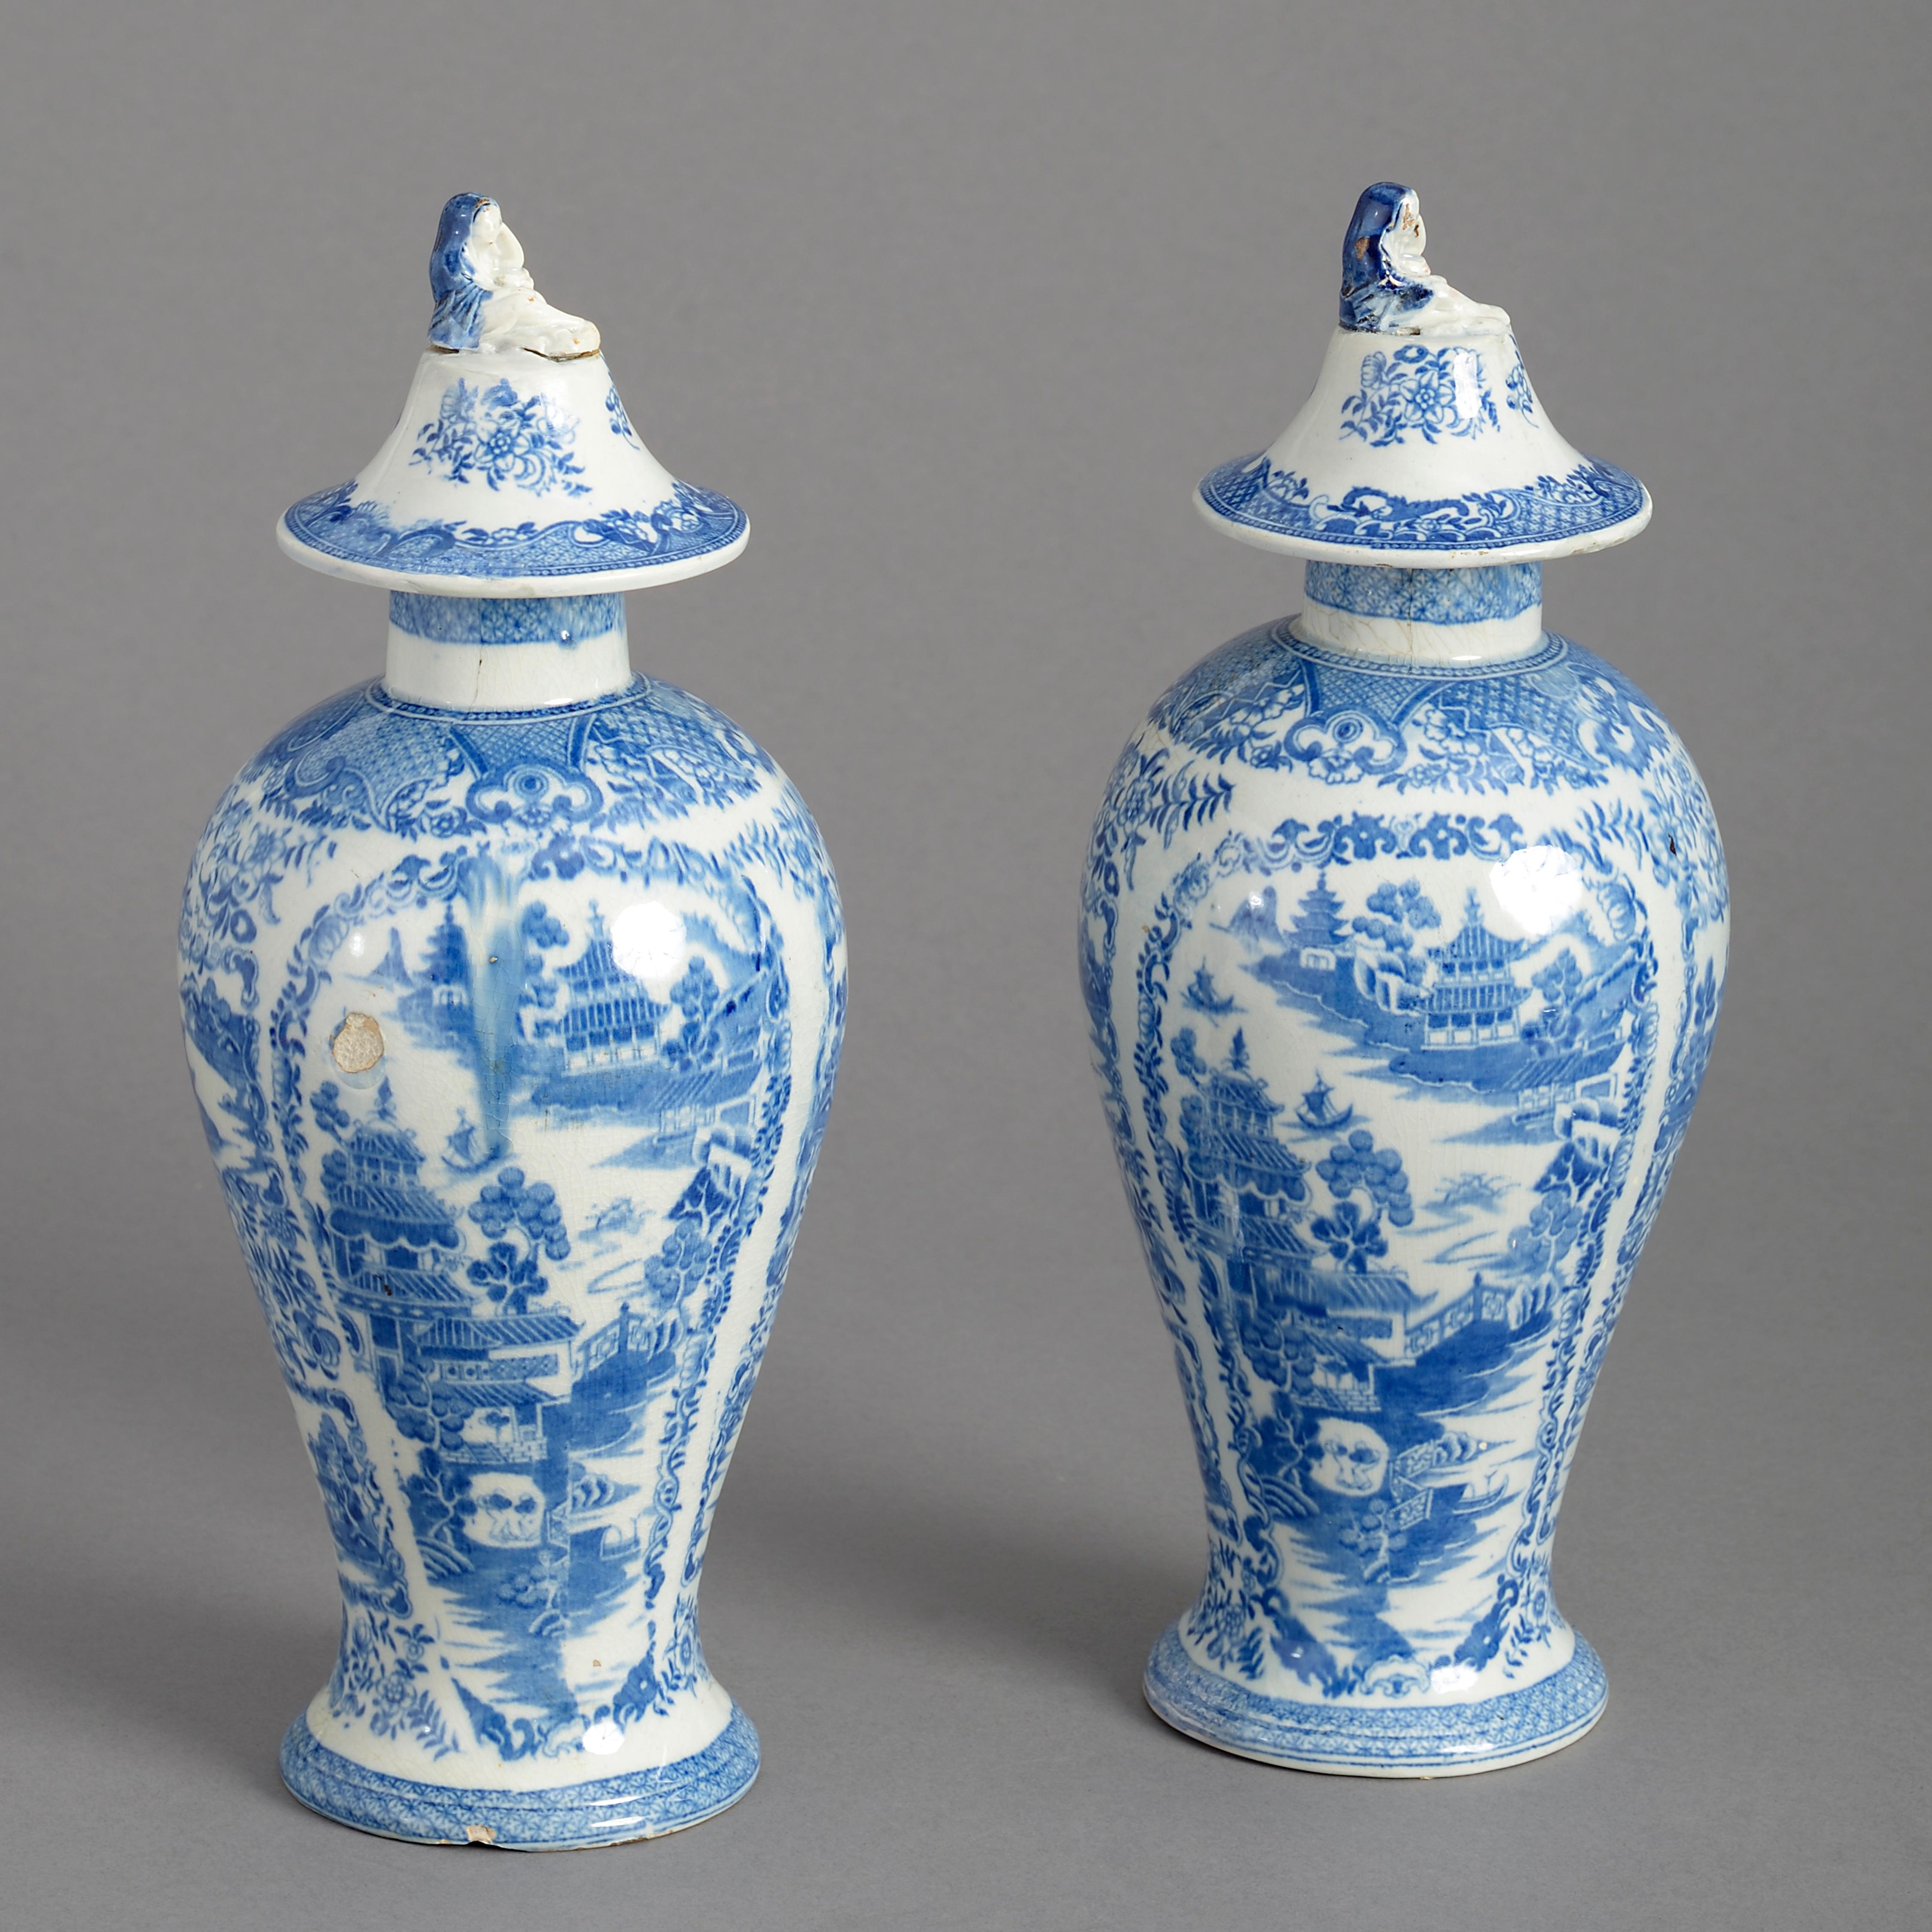 Chinoiserie Pair of 18th Century Blue and White Staffordshire Pottery Vases and Covers